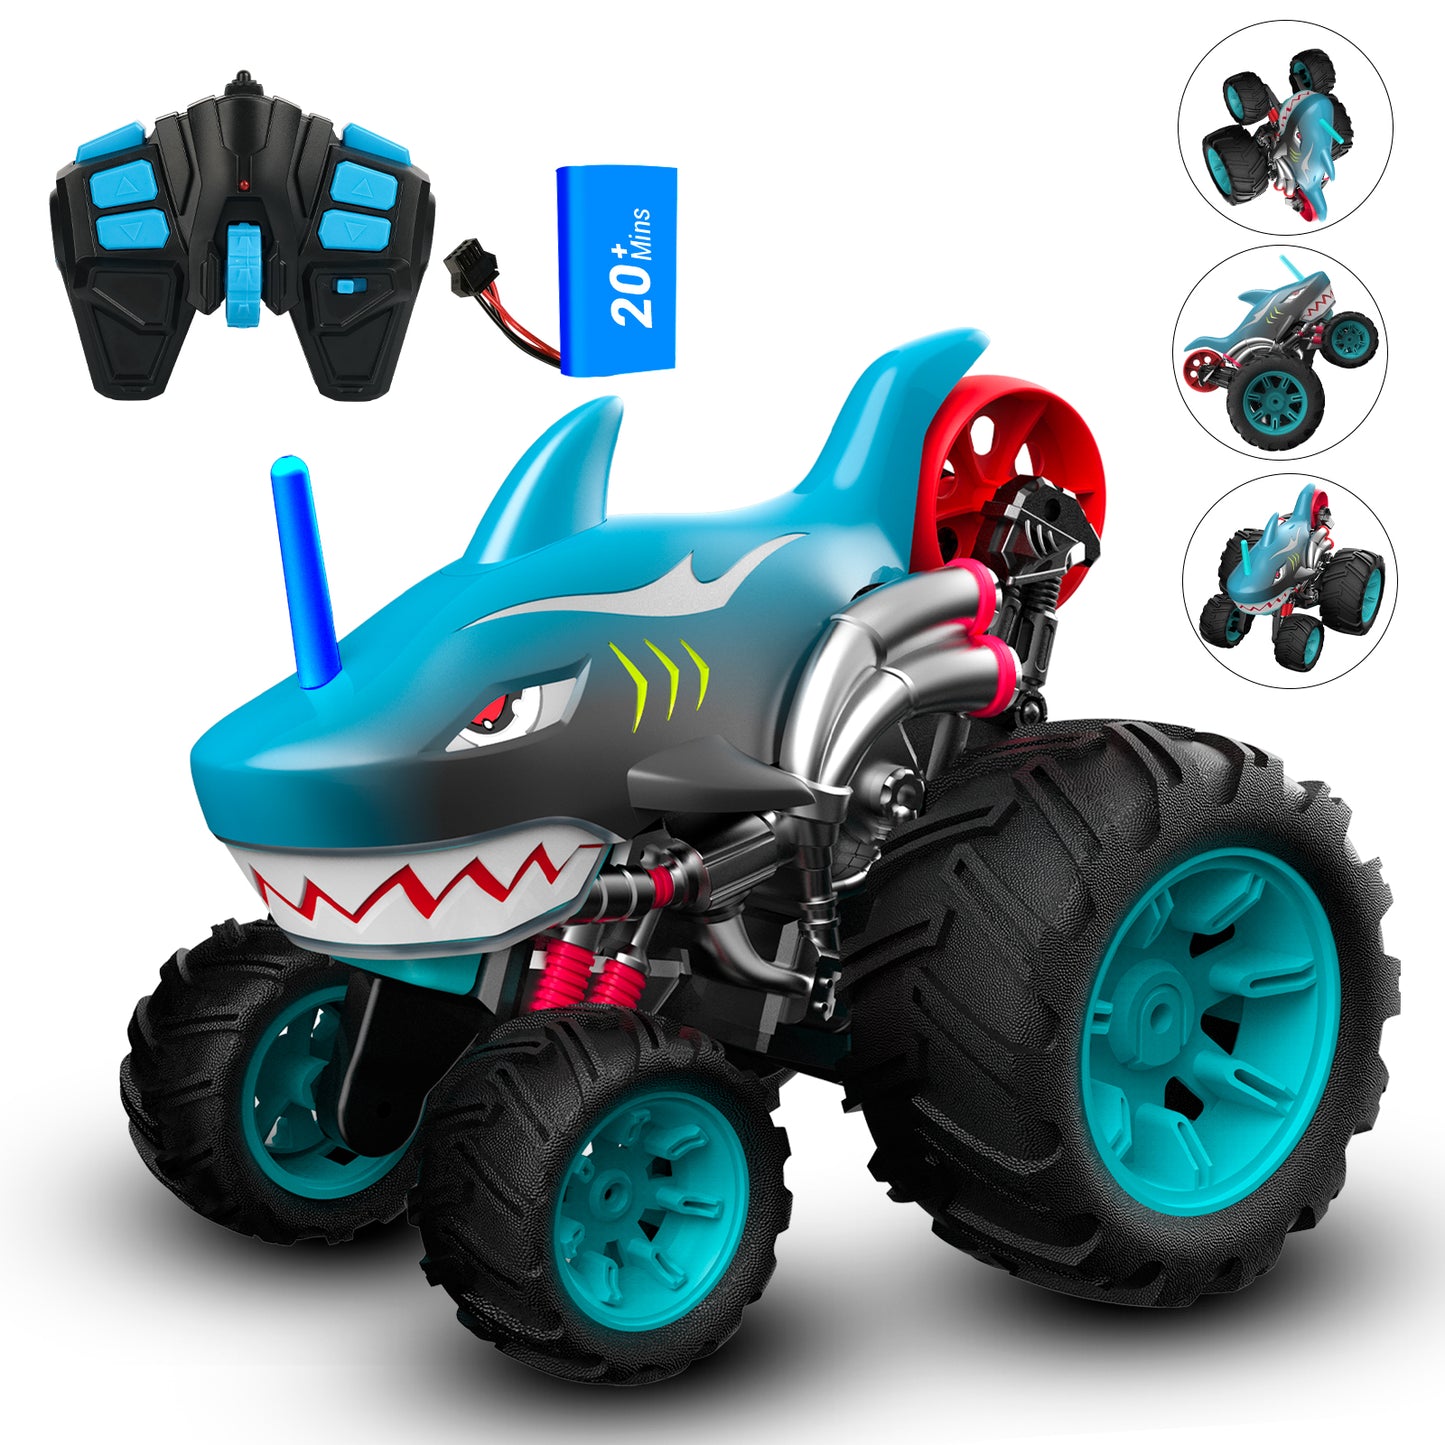 Wisairt Remote Control Monster Truck,1:16 4WD Shark RC Car with 360 Degress Rotation Upright Stunt Car Toys for Kids Boys Girls Age 3+